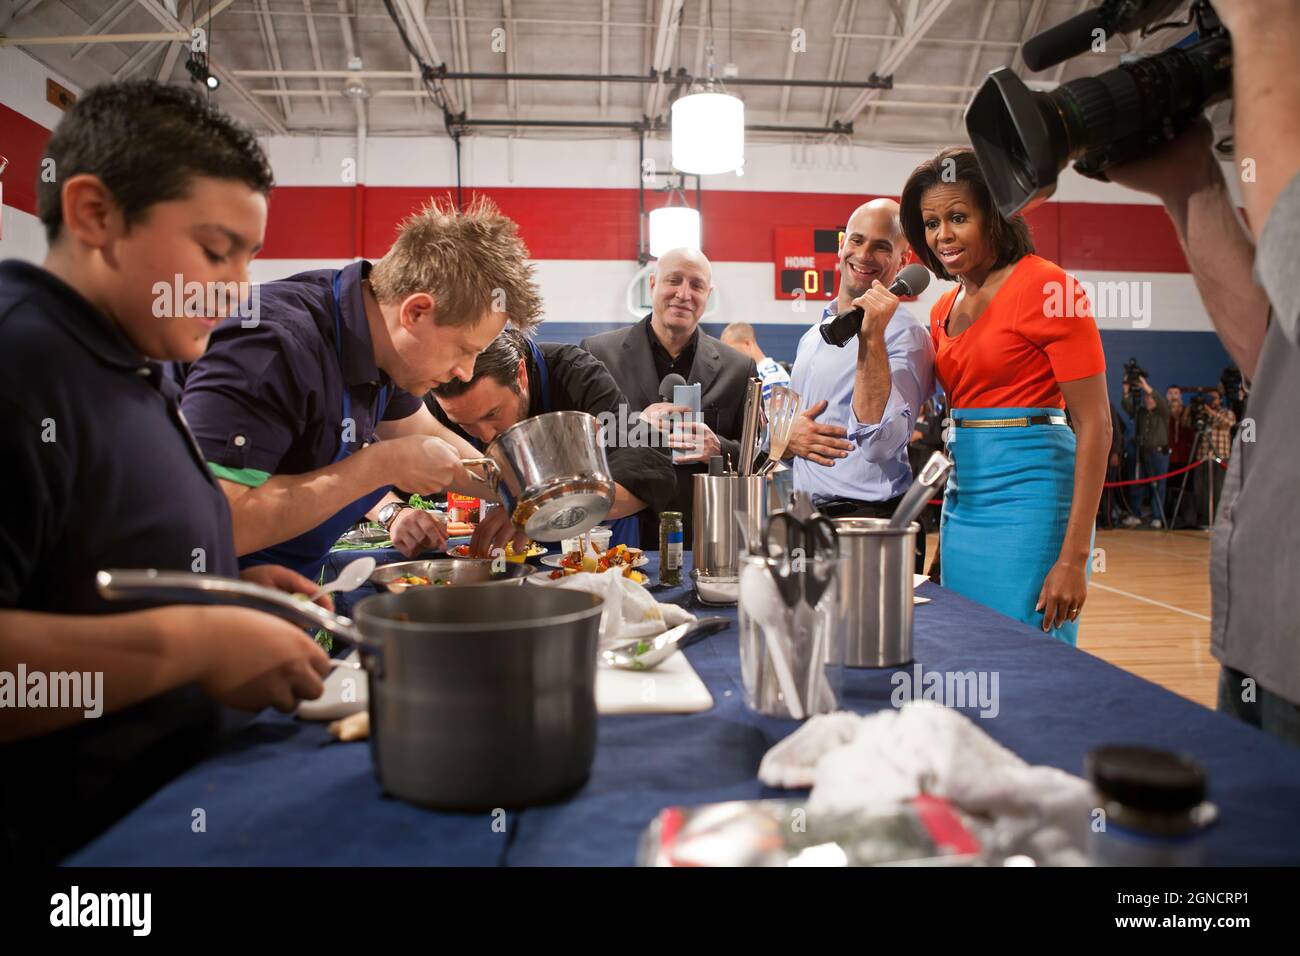 First Lady Michelle Obama, Sam Kass, Senior Policy Advisor for Healthy Food Initiatives, and Top Chef head judge Tom Colicchio, center, watch as chefs from past seasons of “Top Chef' and students take part in a cooking competition at the Kleberg Rylie Recreation Center in Dallas, Texas, Feb. 10, 2012. The event, which helped celebrate the second anniversary of the 'Let's Move!' initiative, highlighted the work being done in schools across America to provide healthier food to students. (Official White House Photo by Sonya N. Hebert) This official White House photograph is being made available o Stock Photo